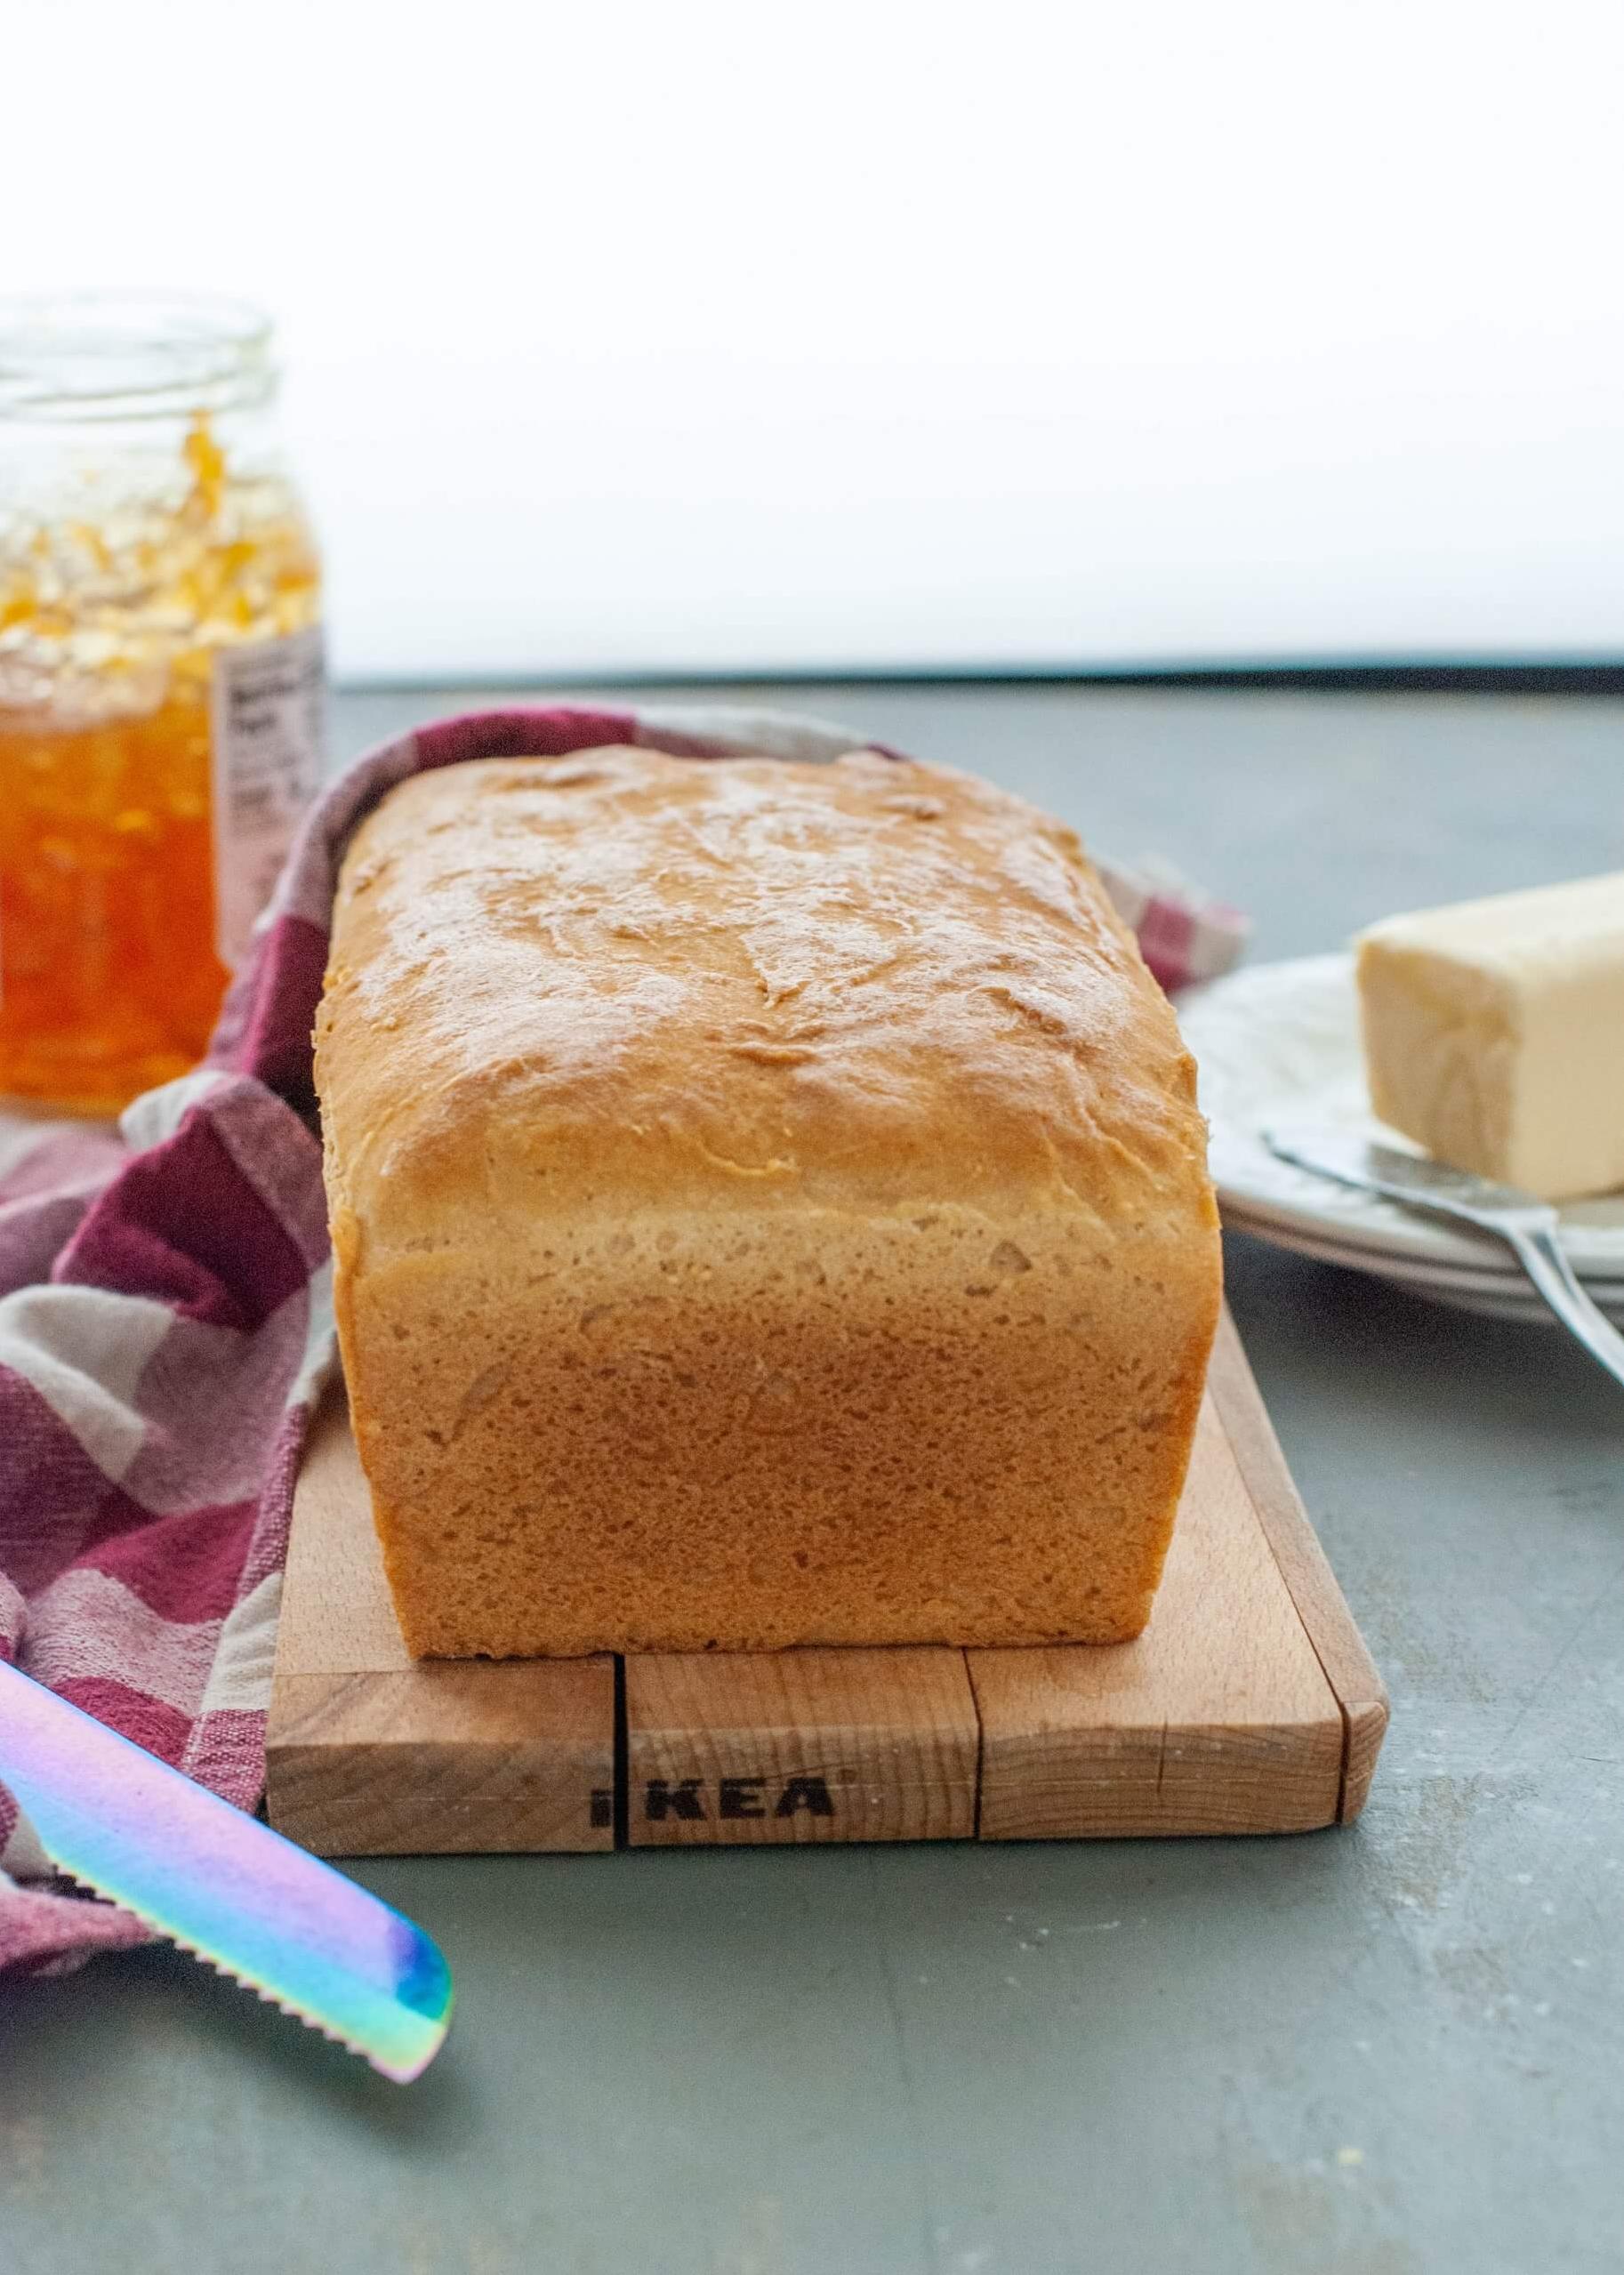  Say goodbye to bread cravings with this allergen-free option